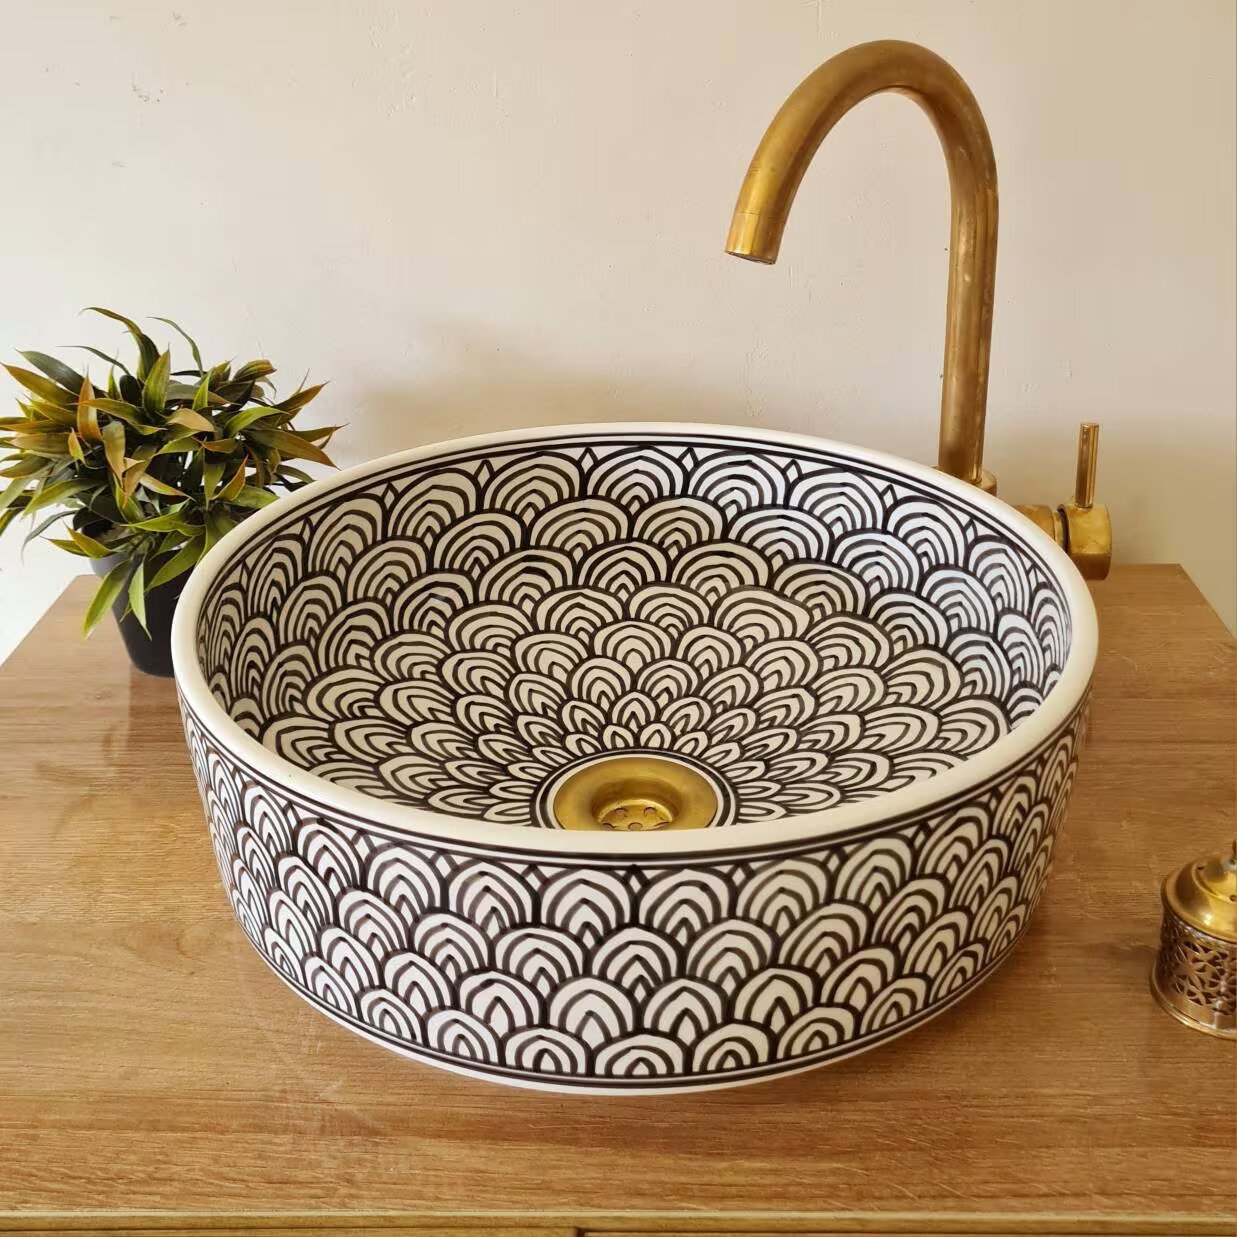 Moroccan sink | moroccan ceramic sink | bathroom sink | moroccan bathroom basin | cloakroom basin | Bllack and white #16